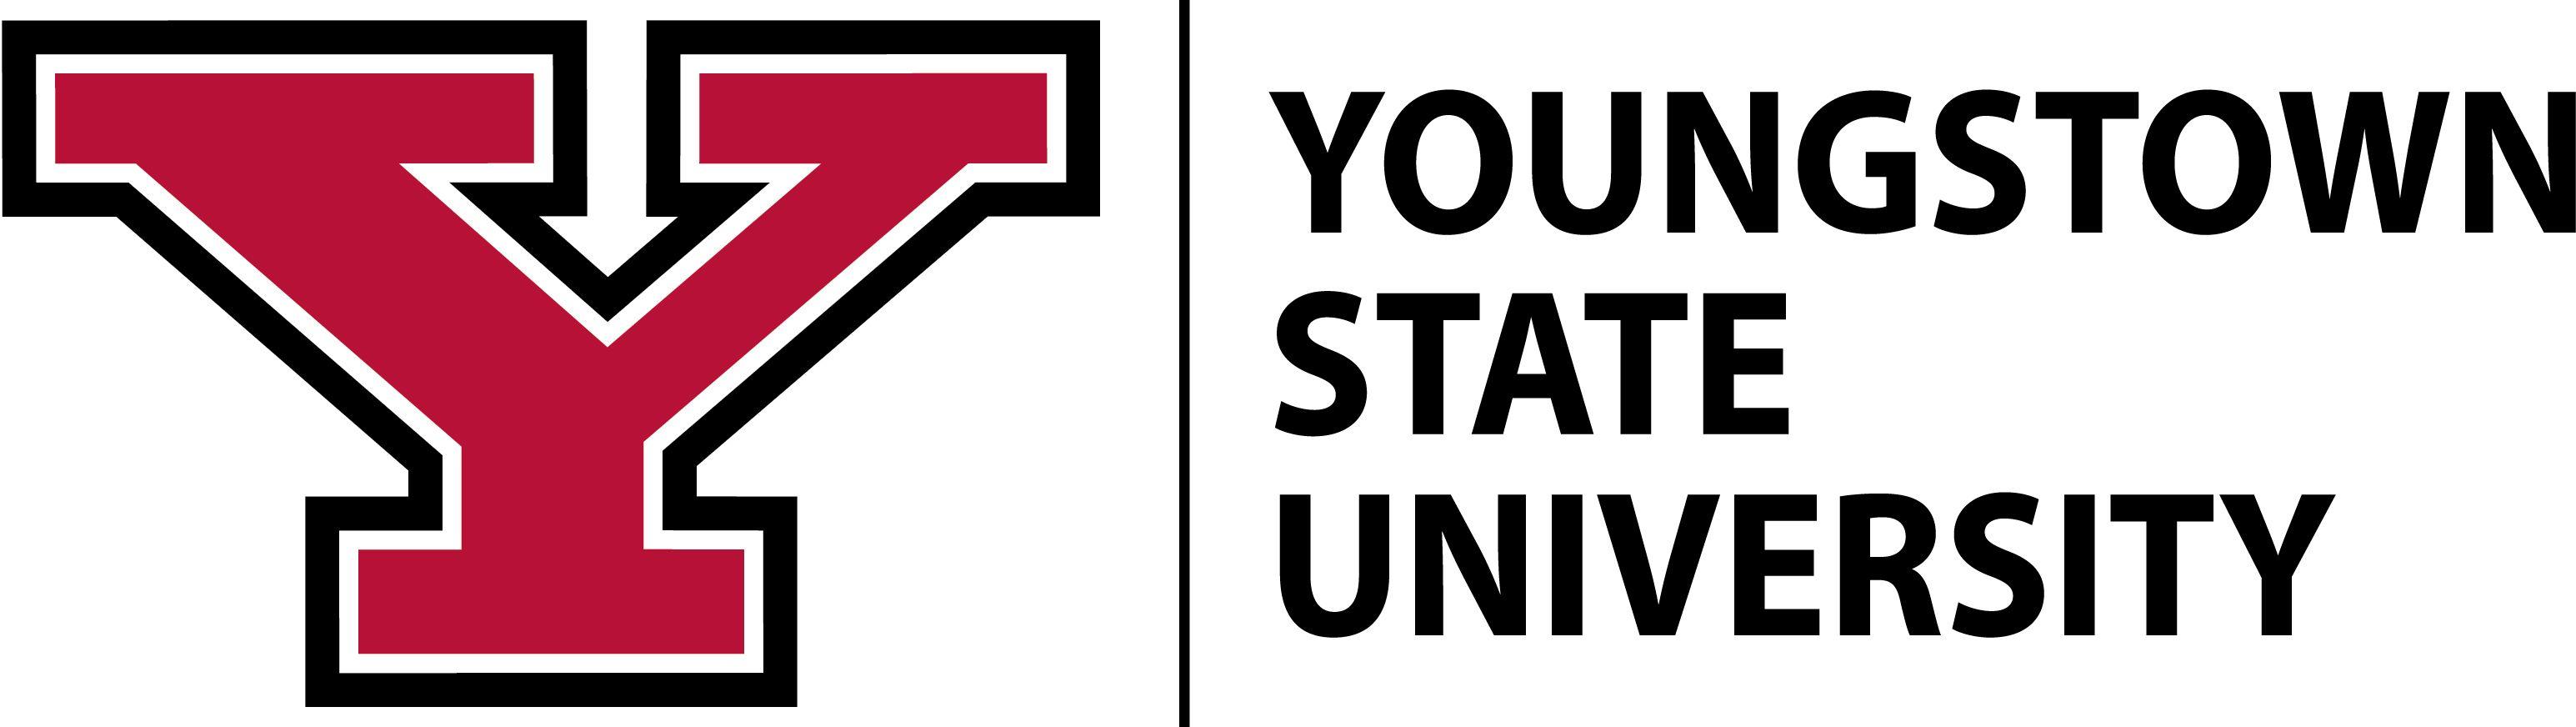 Youngstown Logo - YSU confirms some football players failed NCAA testing